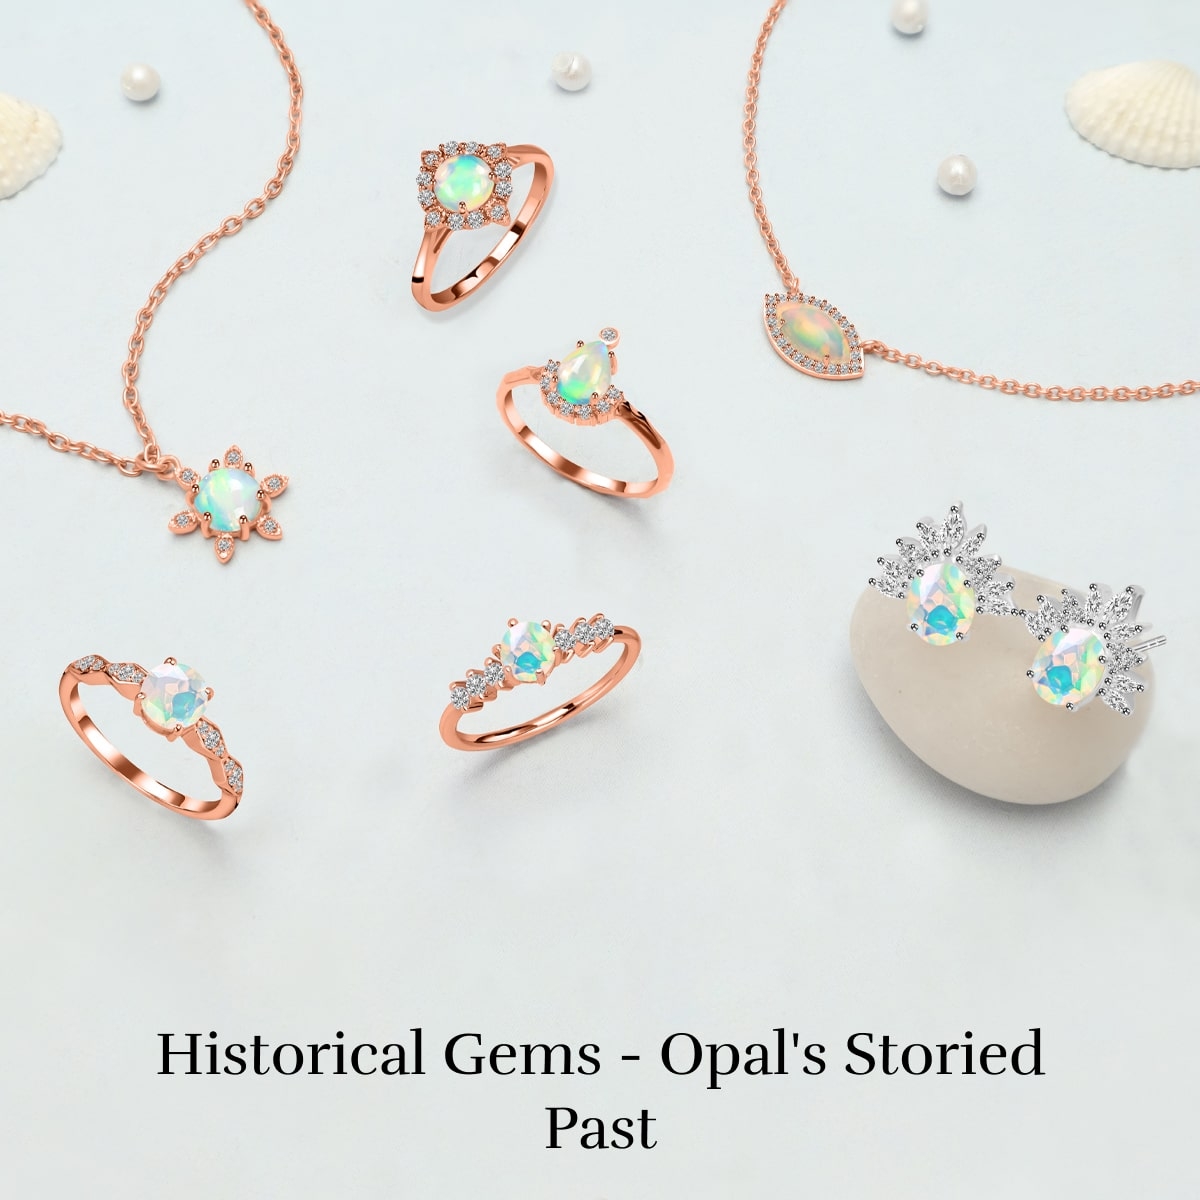 The History of Opal Gemstones